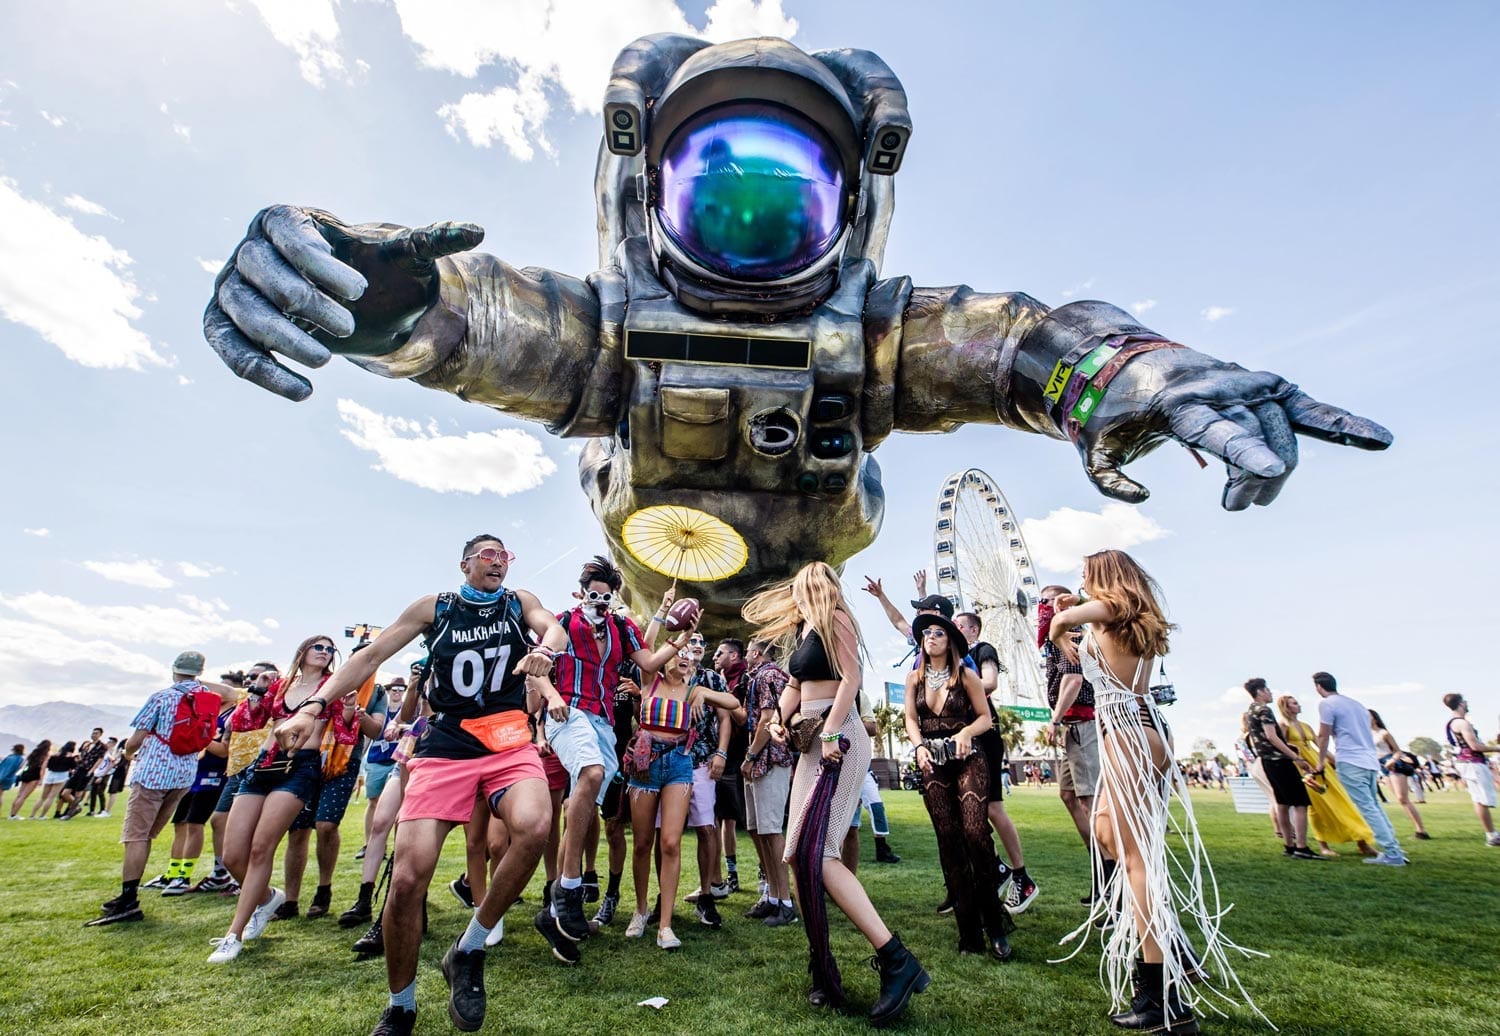 Overview Effect better known as Coachella Astronaut with festivalgoers dancing